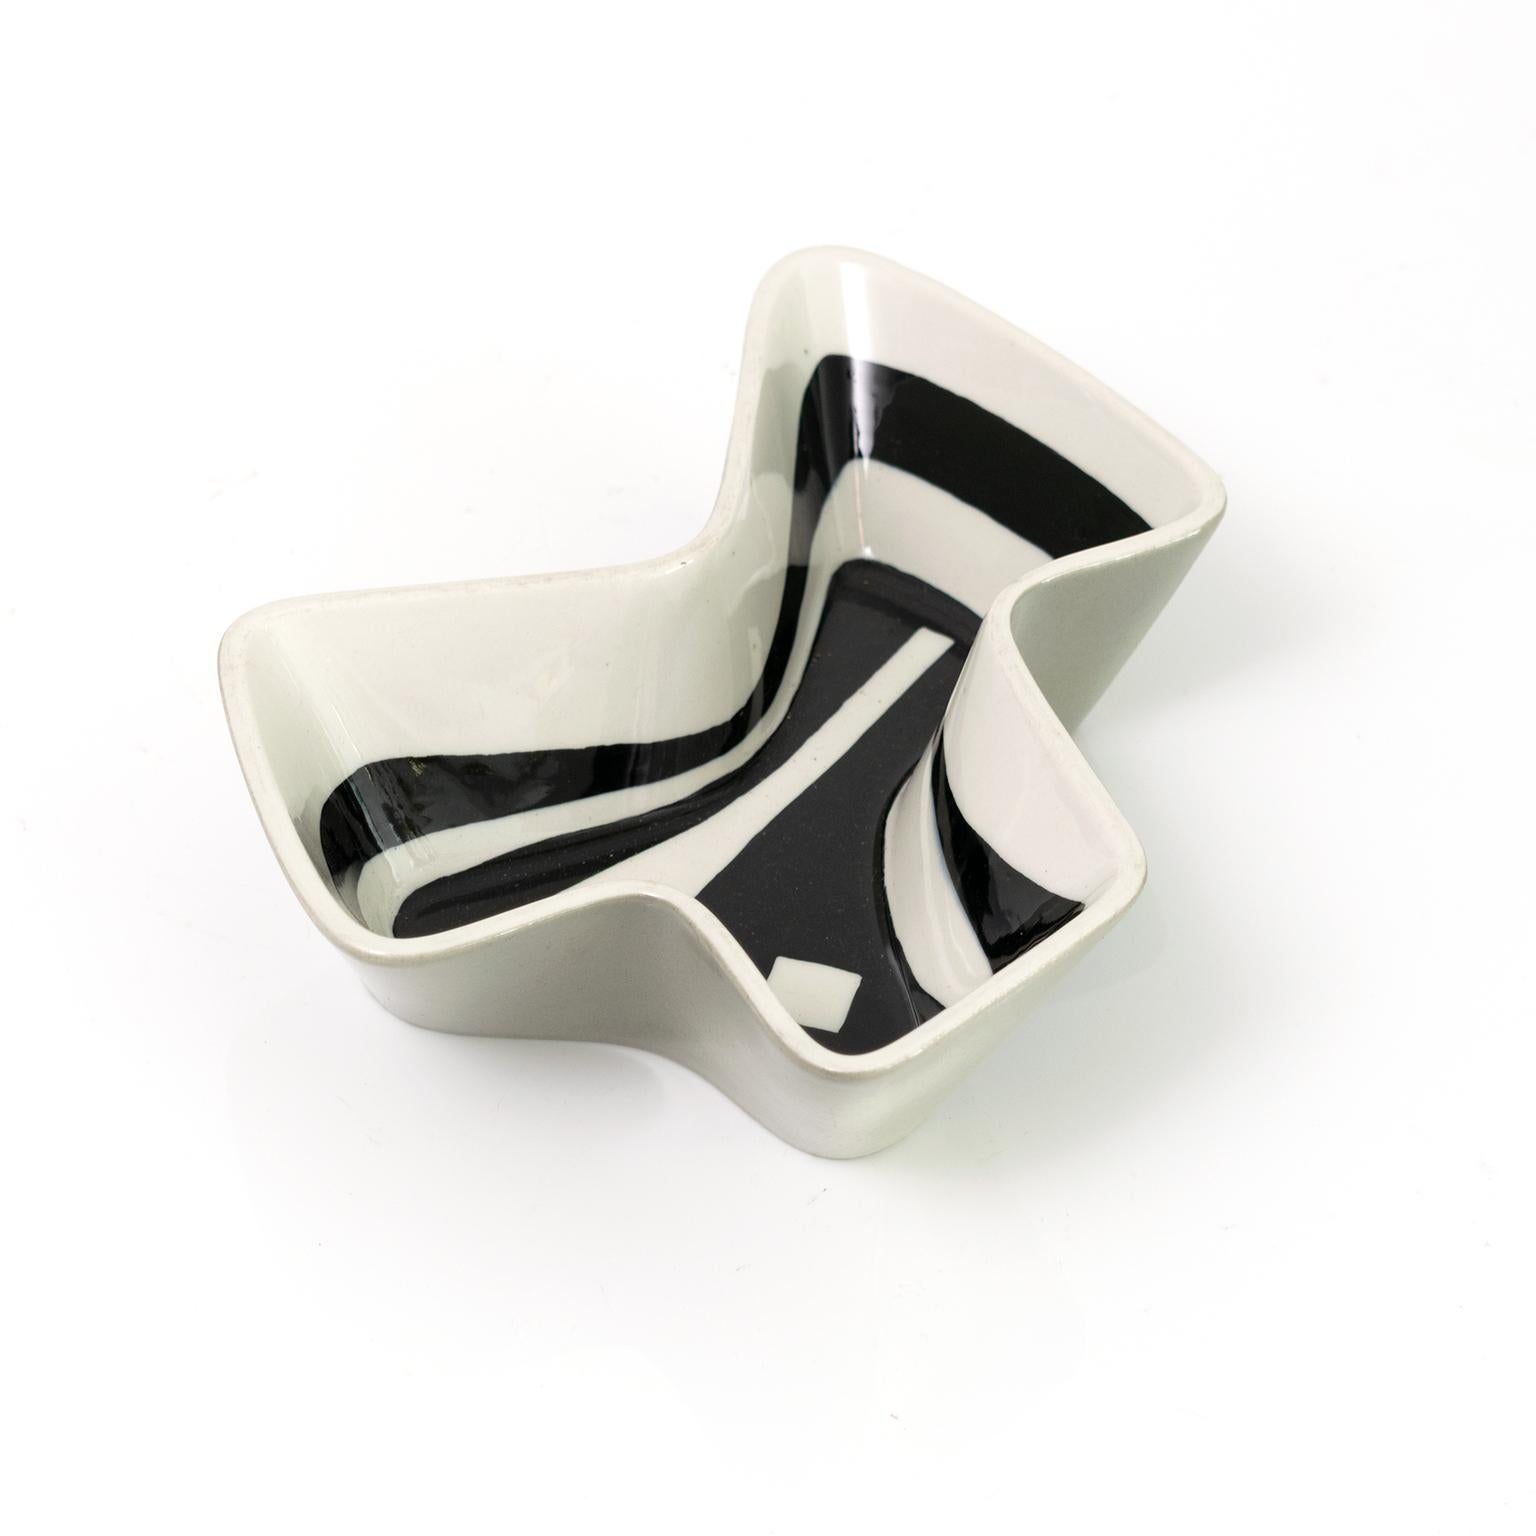 Carl-Harry Stalhane Geometric Bowl and Vase, Rorstrand, Sweden 1950 For Sale 5